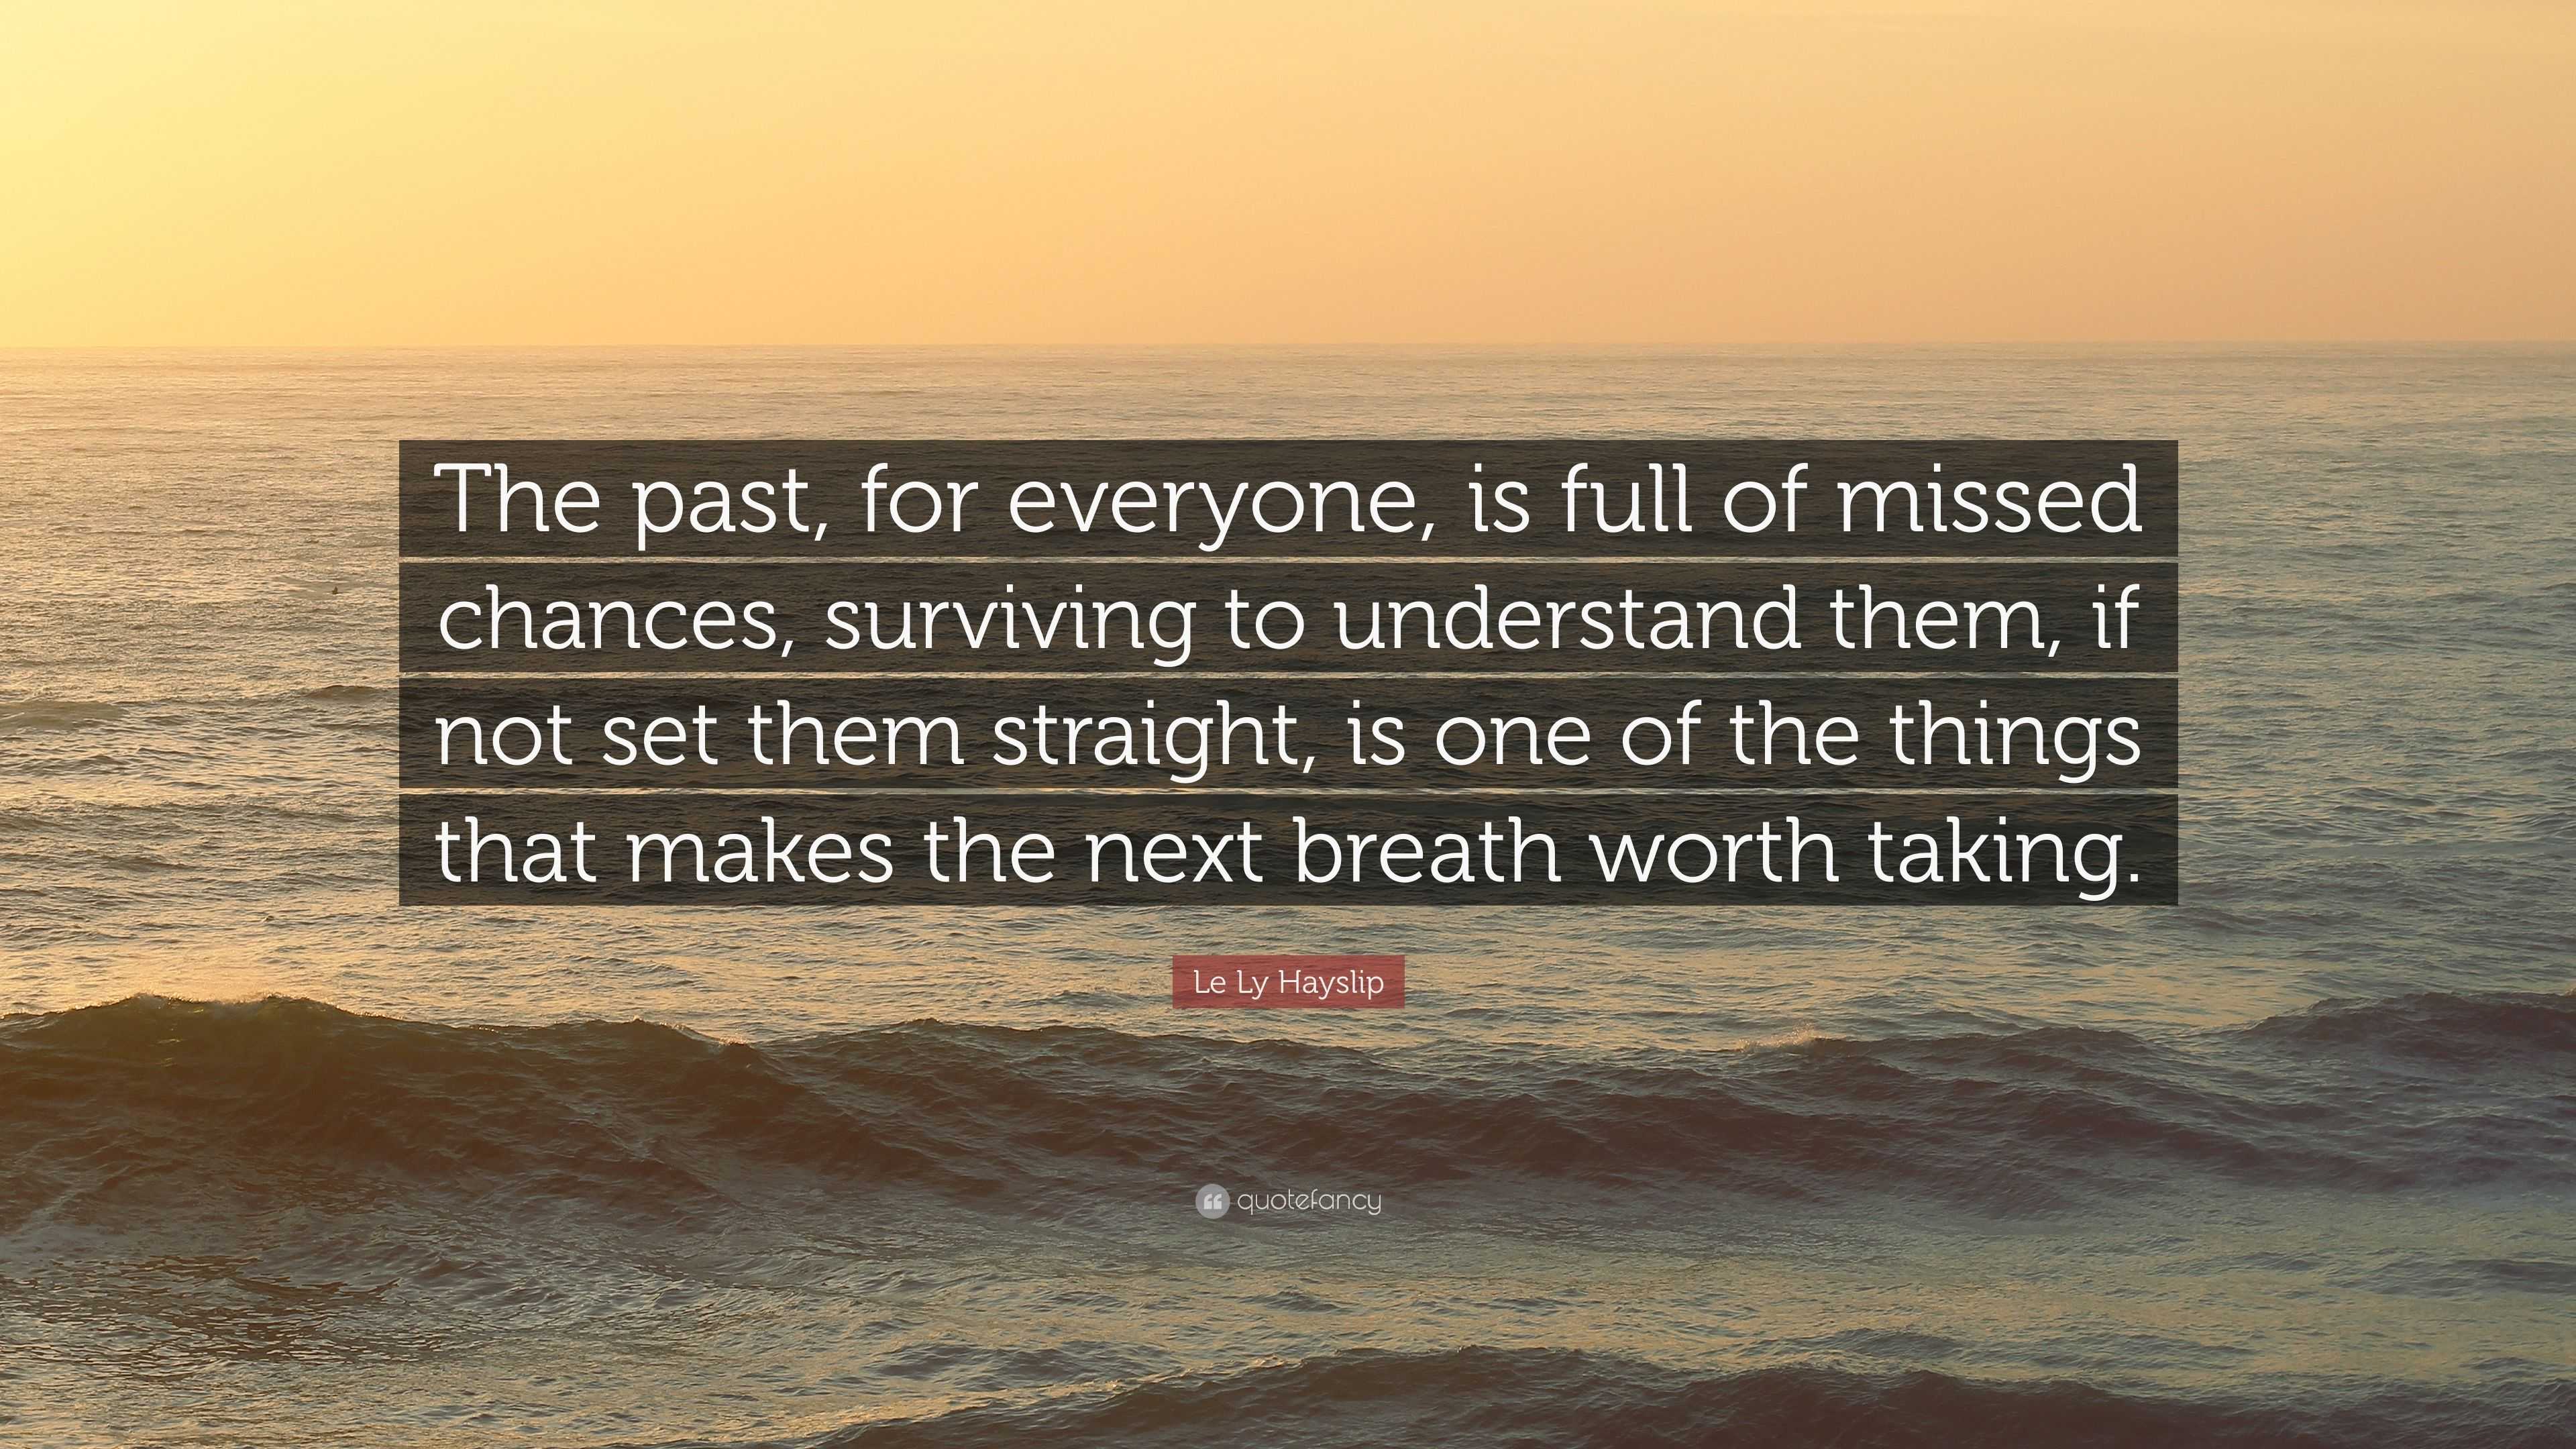 Le Ly Hayslip Quote: “The past, for everyone, is full of missed chances ...